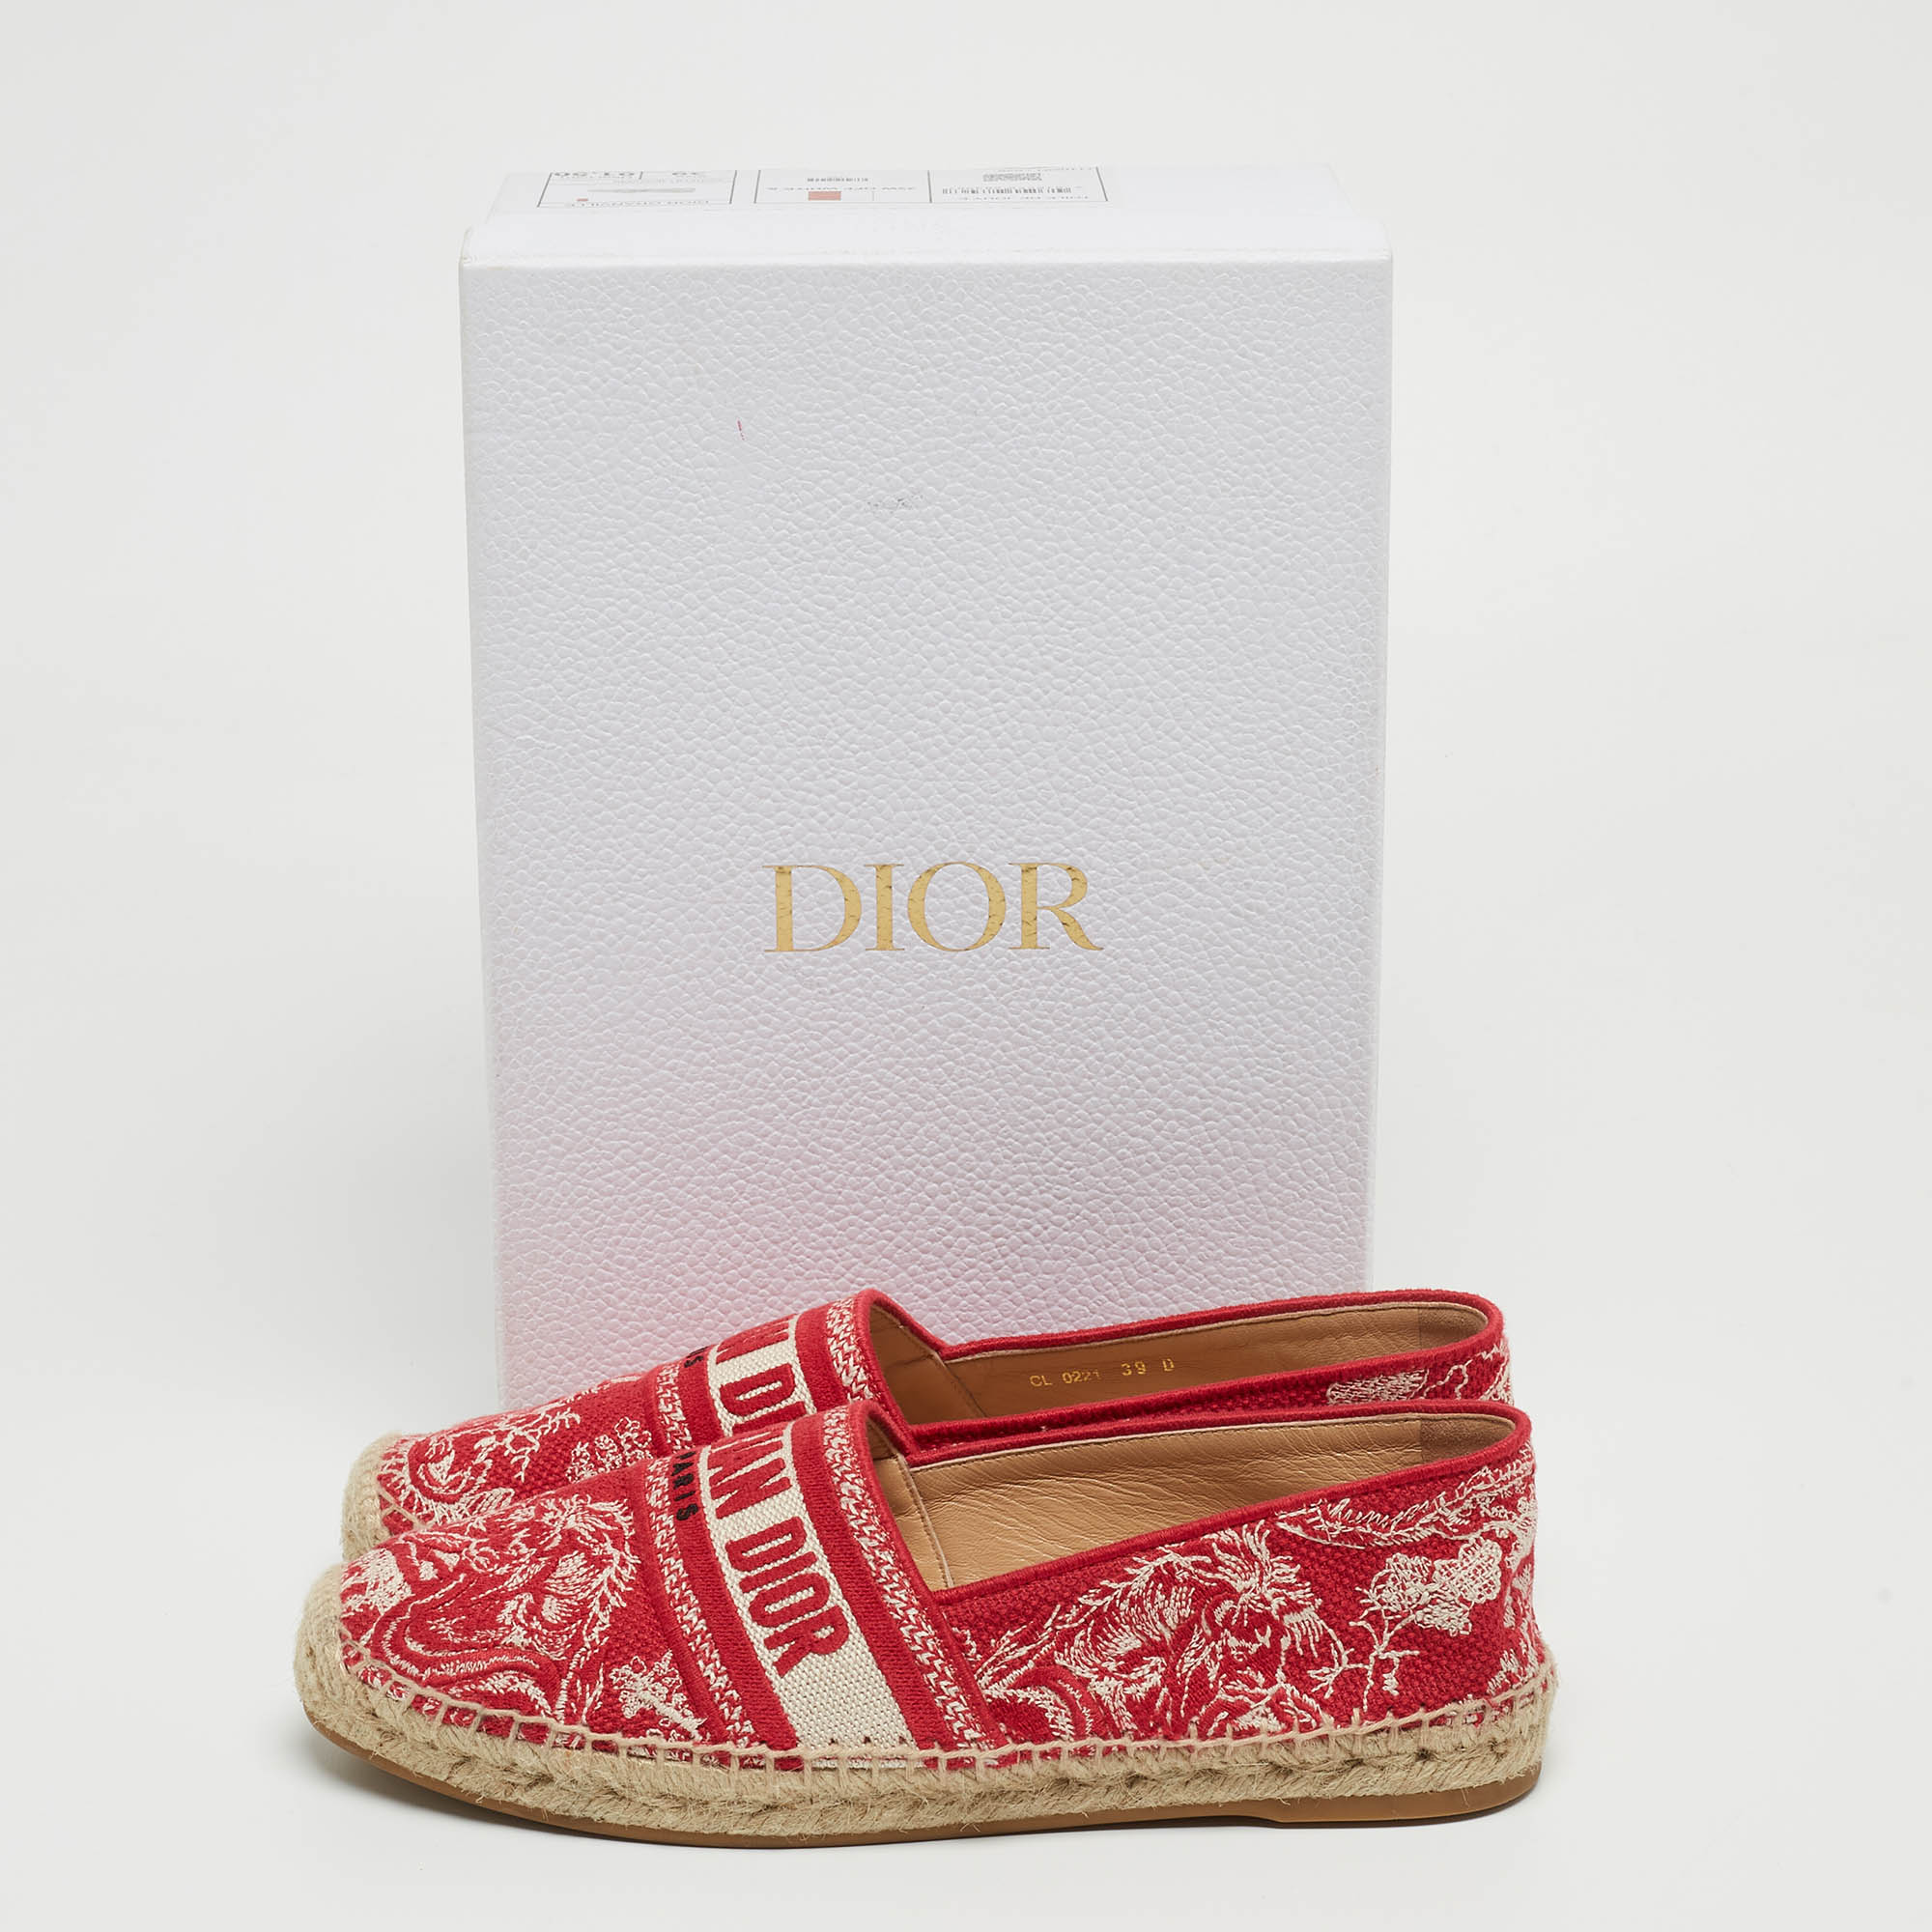 Dior White/Red Floral Embroidered Canvas Granville Espadrille Flats Size 39